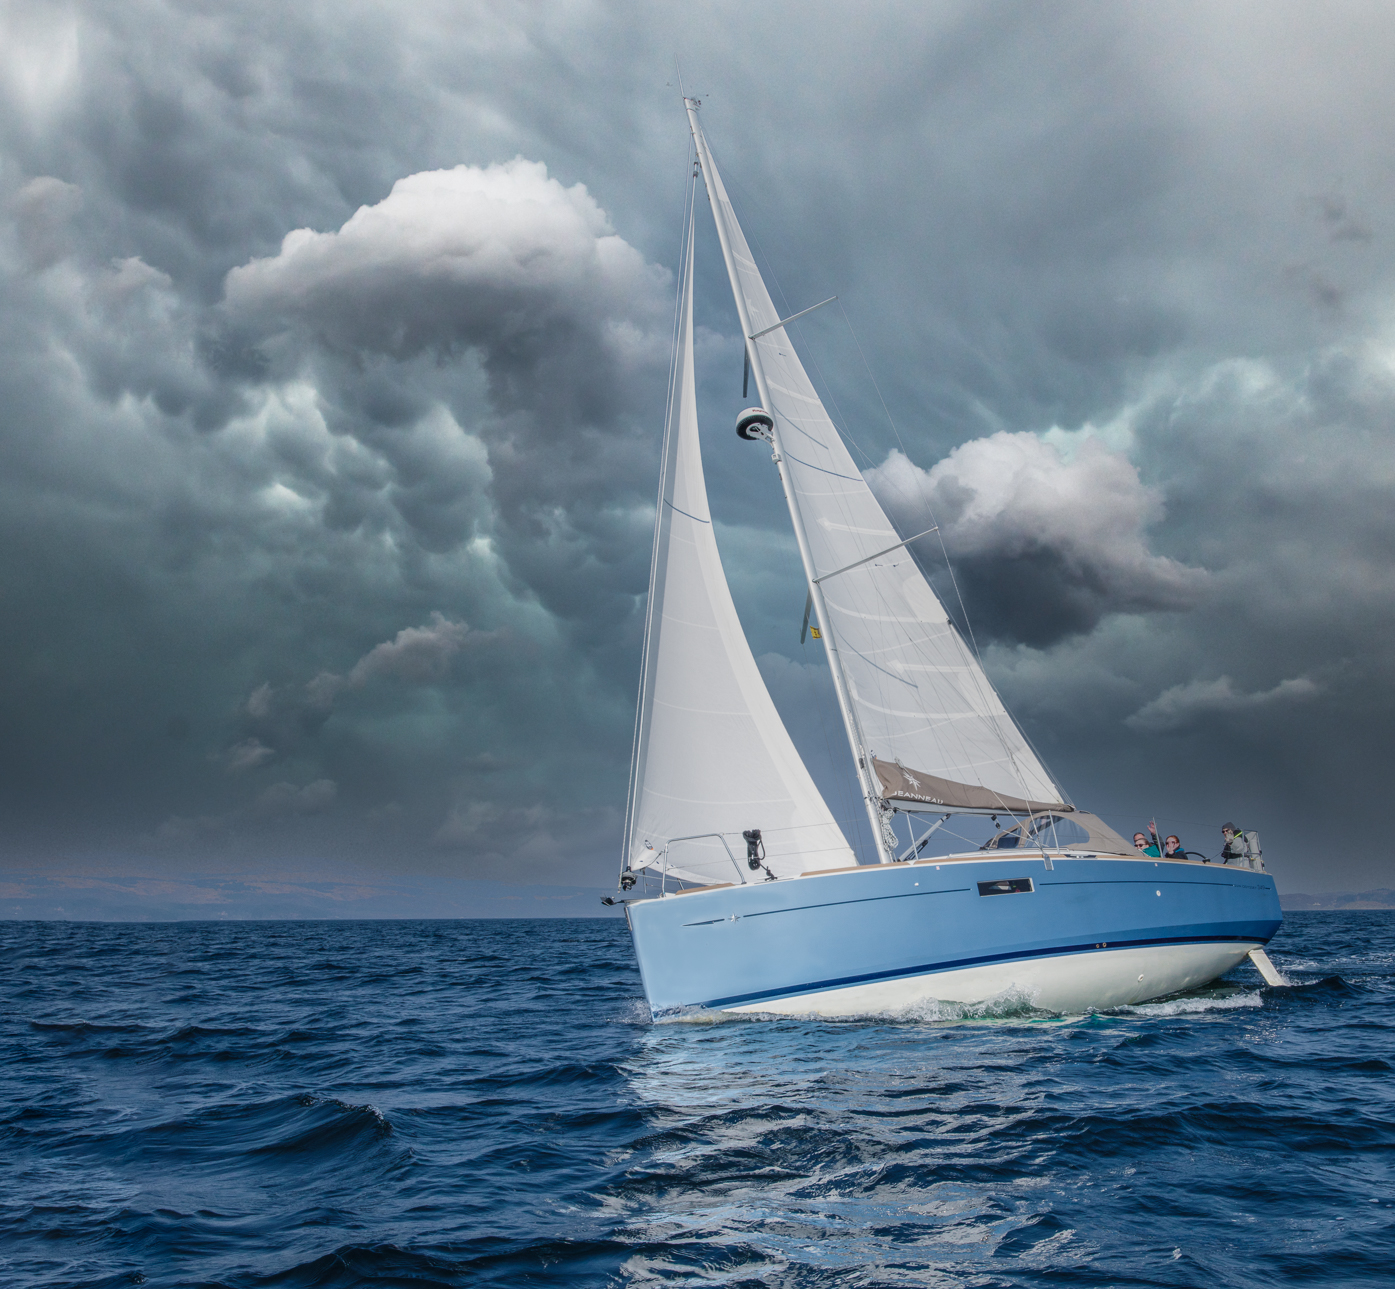 photographer StudioDee transport modelling photo. blue j off the west coast of scotland racing into port ahead of the storm.